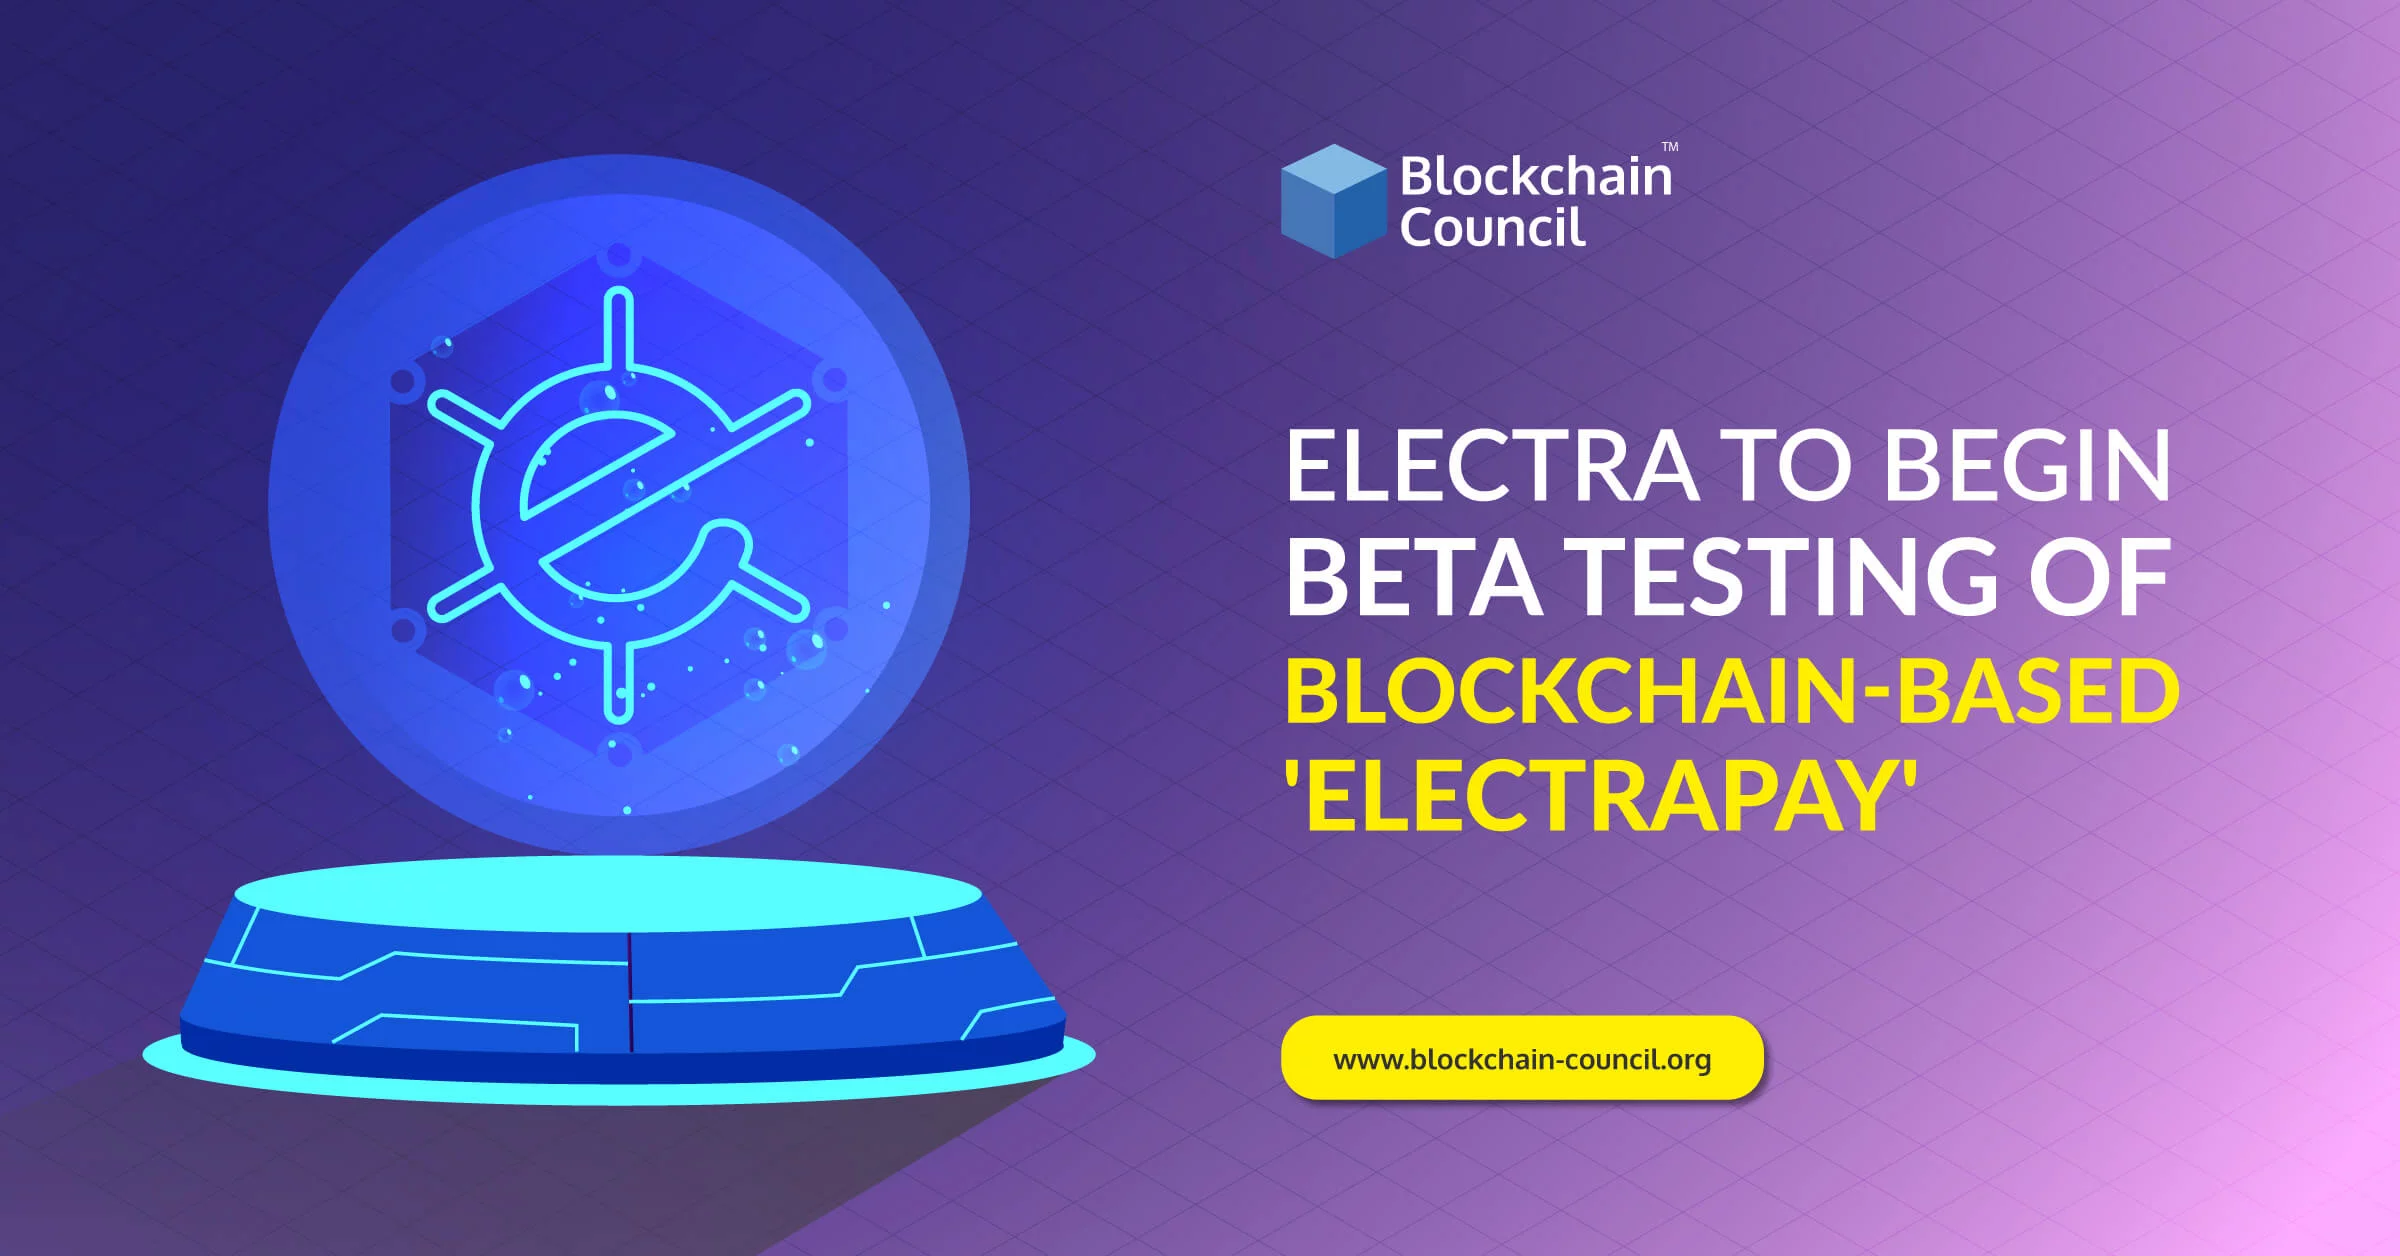 Electra-to-Begin-Beta-Testing-of-Blockchain-Based-'ElectraPay'